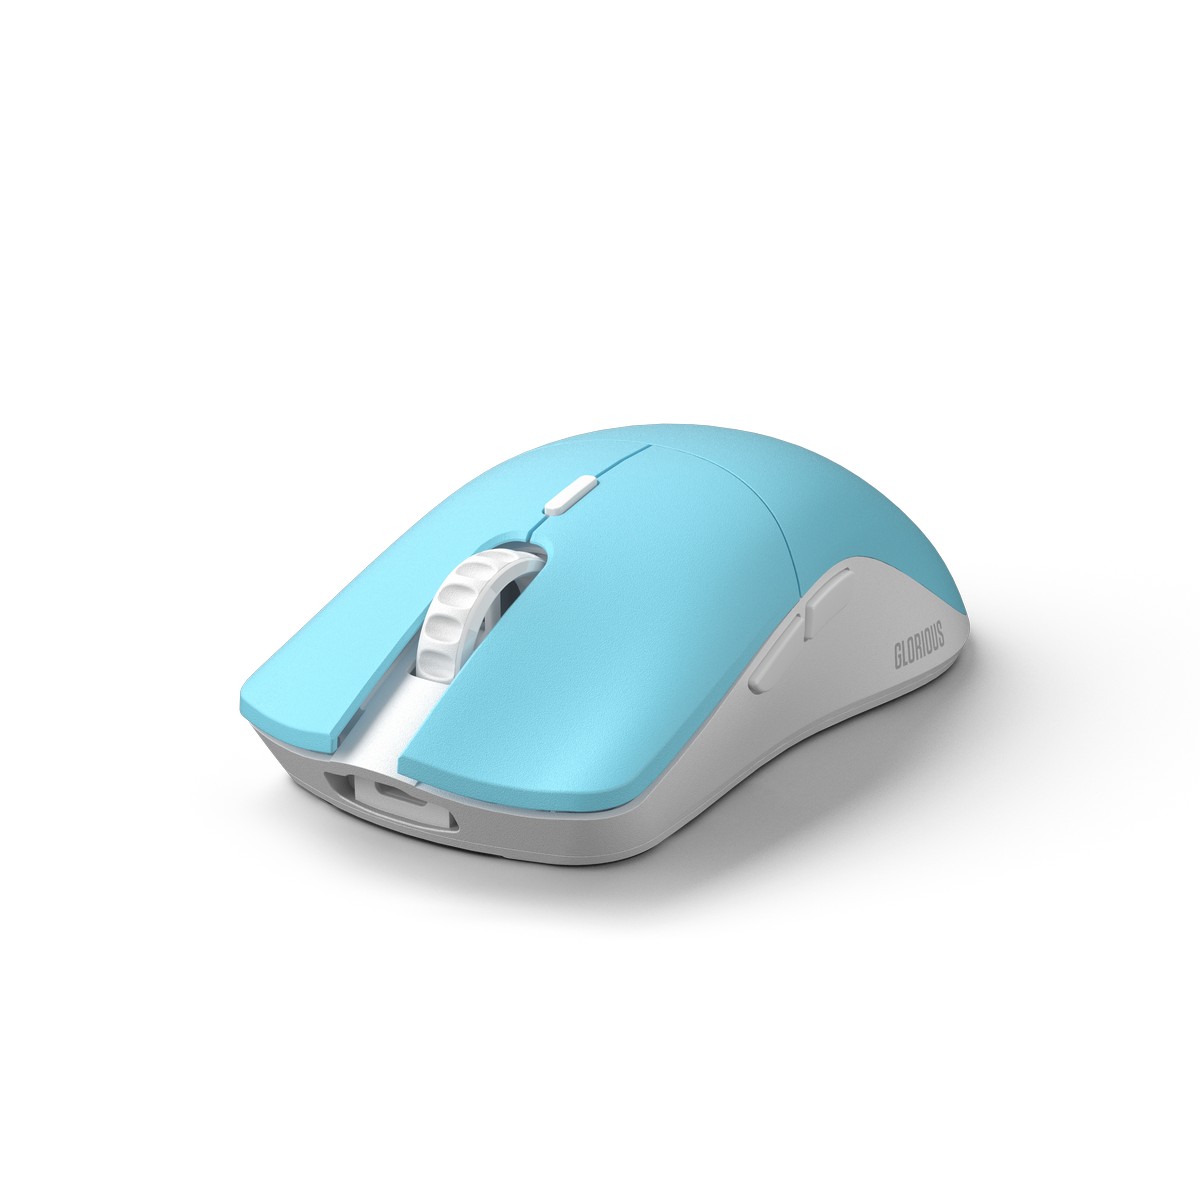 Glorious Model O PRO Wireless Optical Gaming Mouse - Blue Lynx (GLO-MS-OW-BL-FORGE)